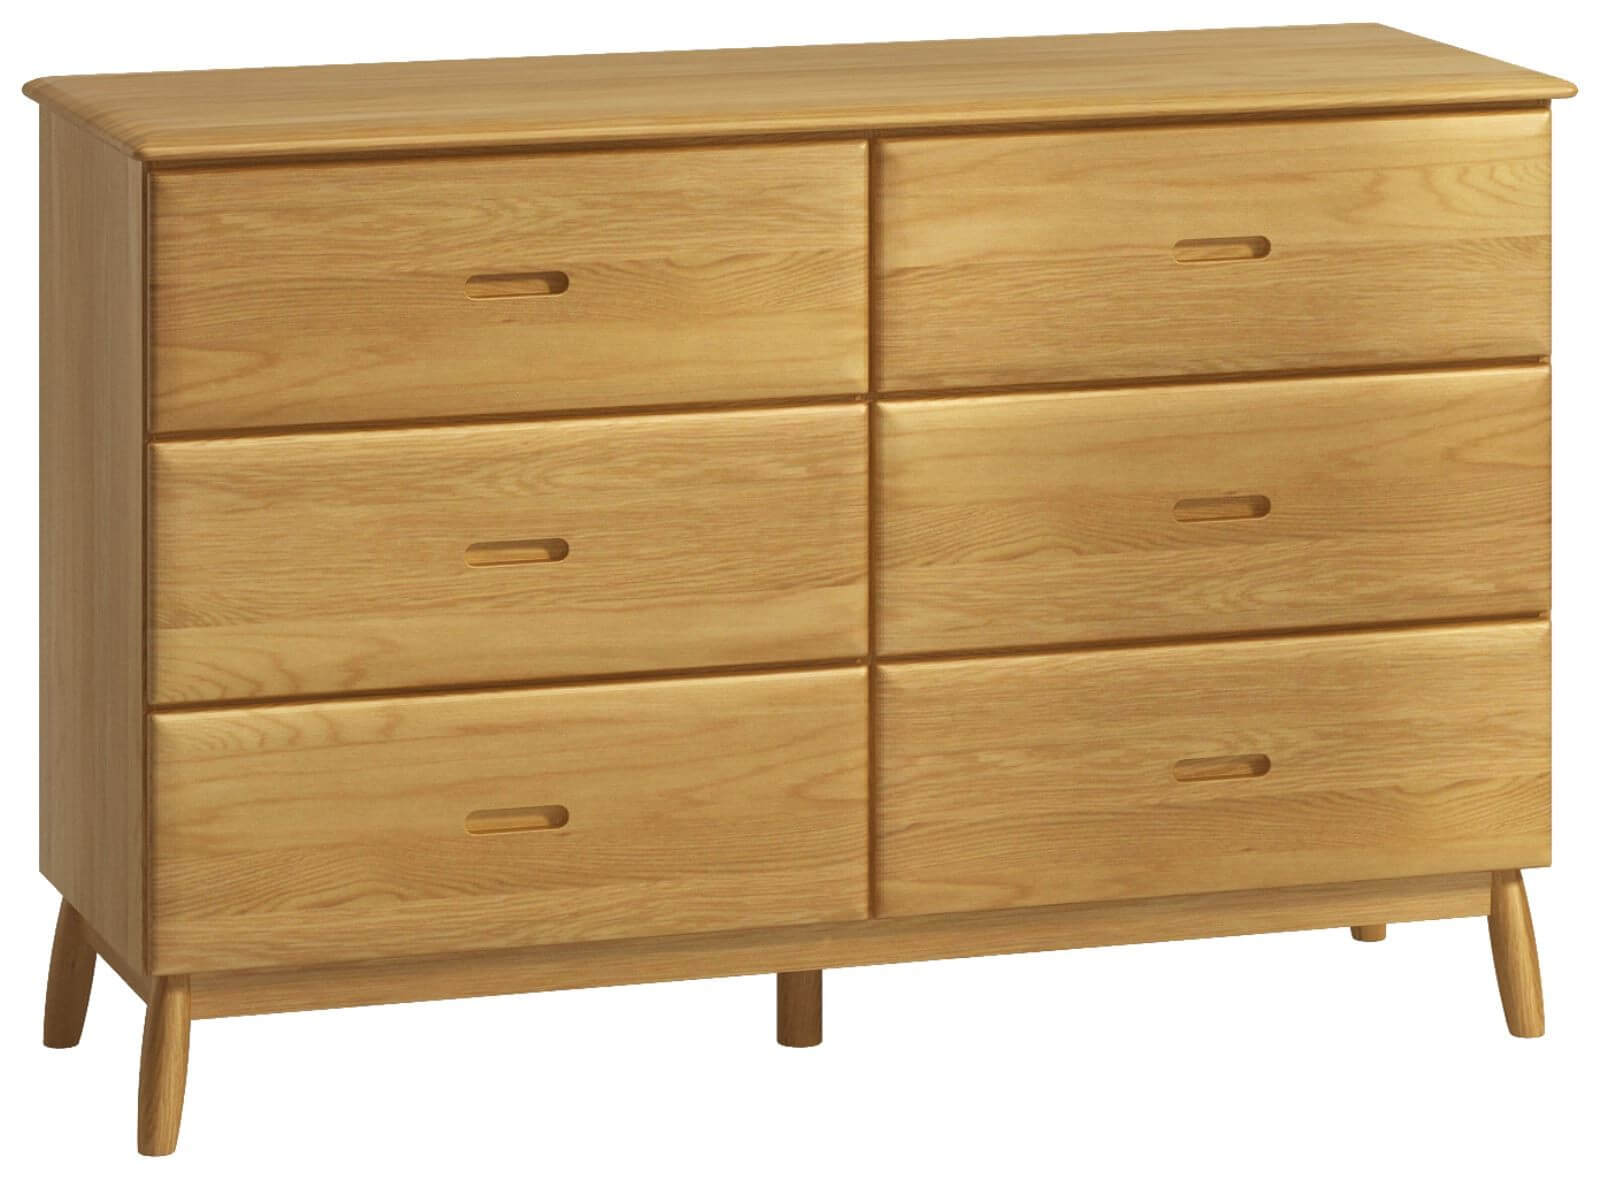 Showing image for Bergen 6-drawer chest - wide